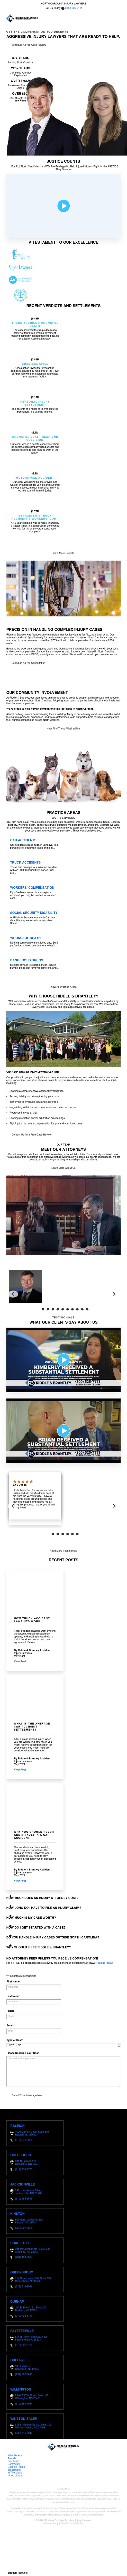 Riddle & Brantley, LLP - Raleigh NC Lawyers